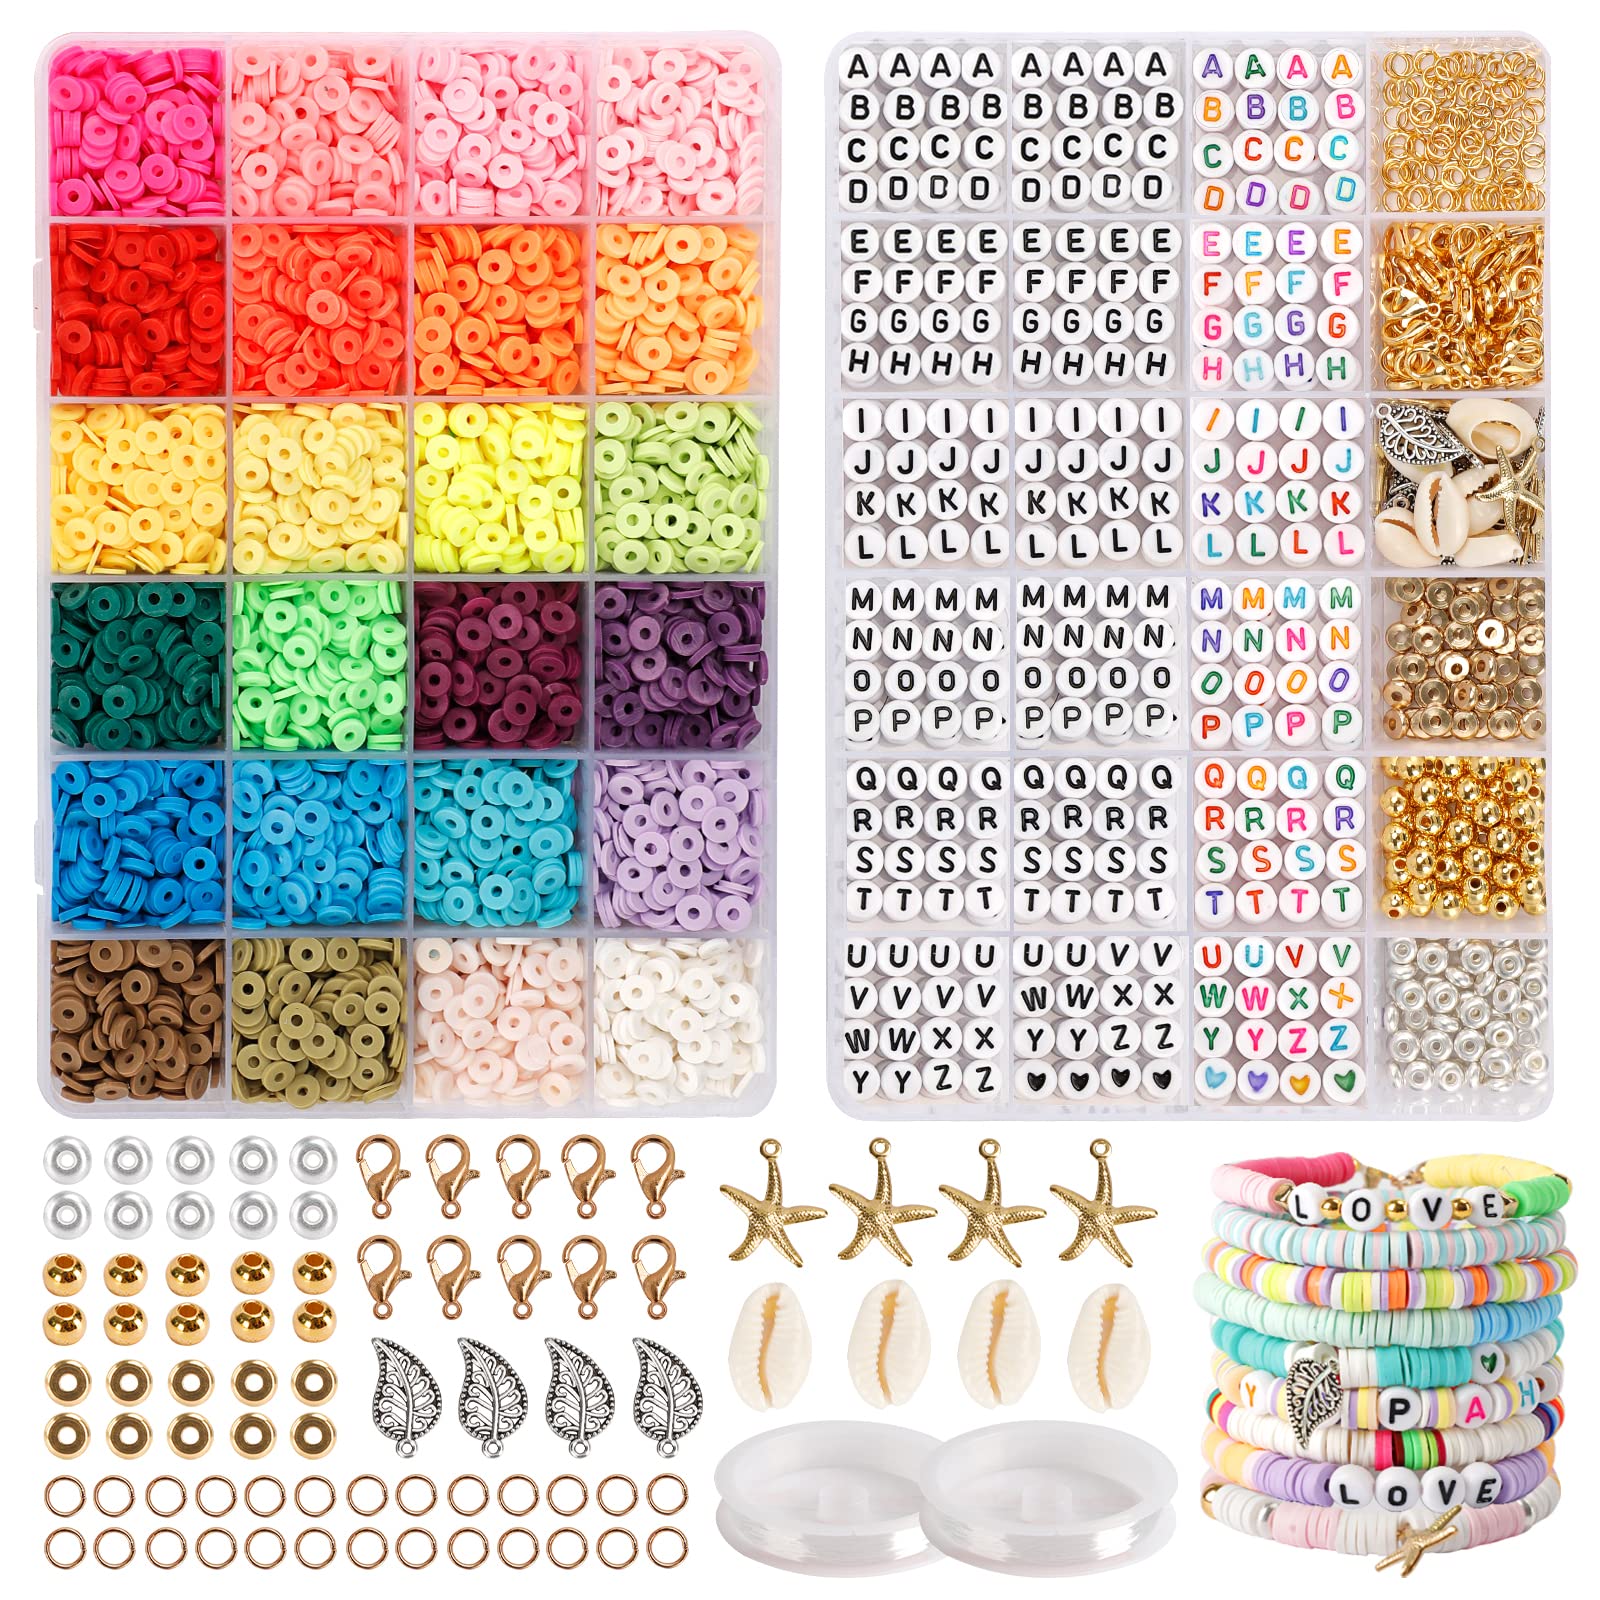 QUEFE 6000pcs 24 Colors Clay Beads for Bracelets Making Kit, Charm